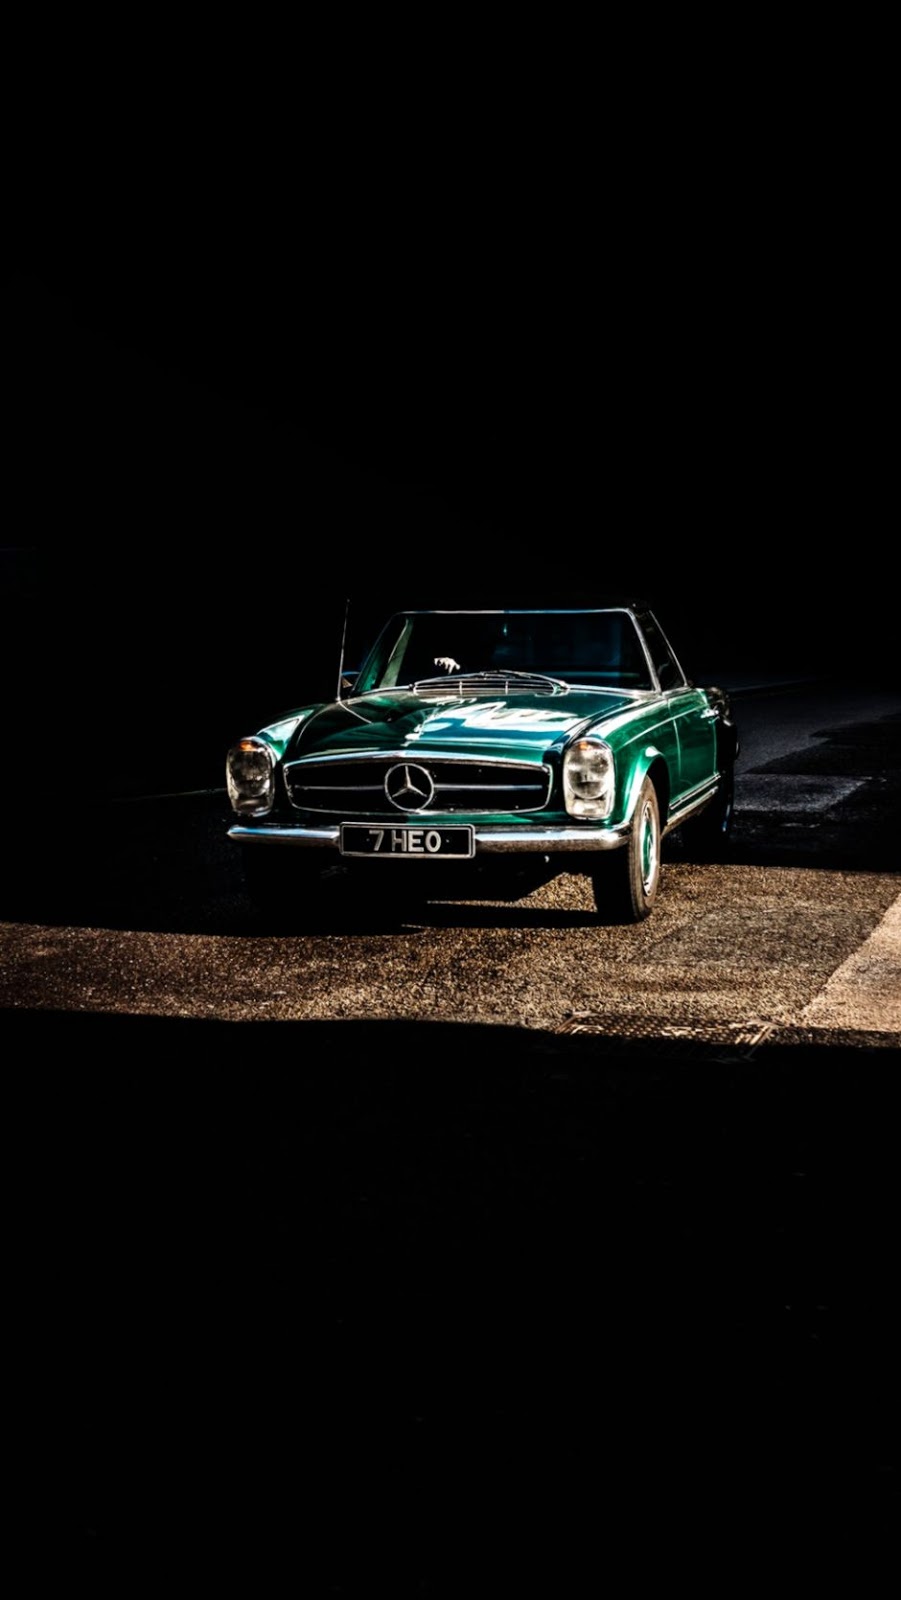 27 Classic Car Pictures Download Free Images On Unsplash - Classic Car Wallpaper Iphone - HD Wallpaper 